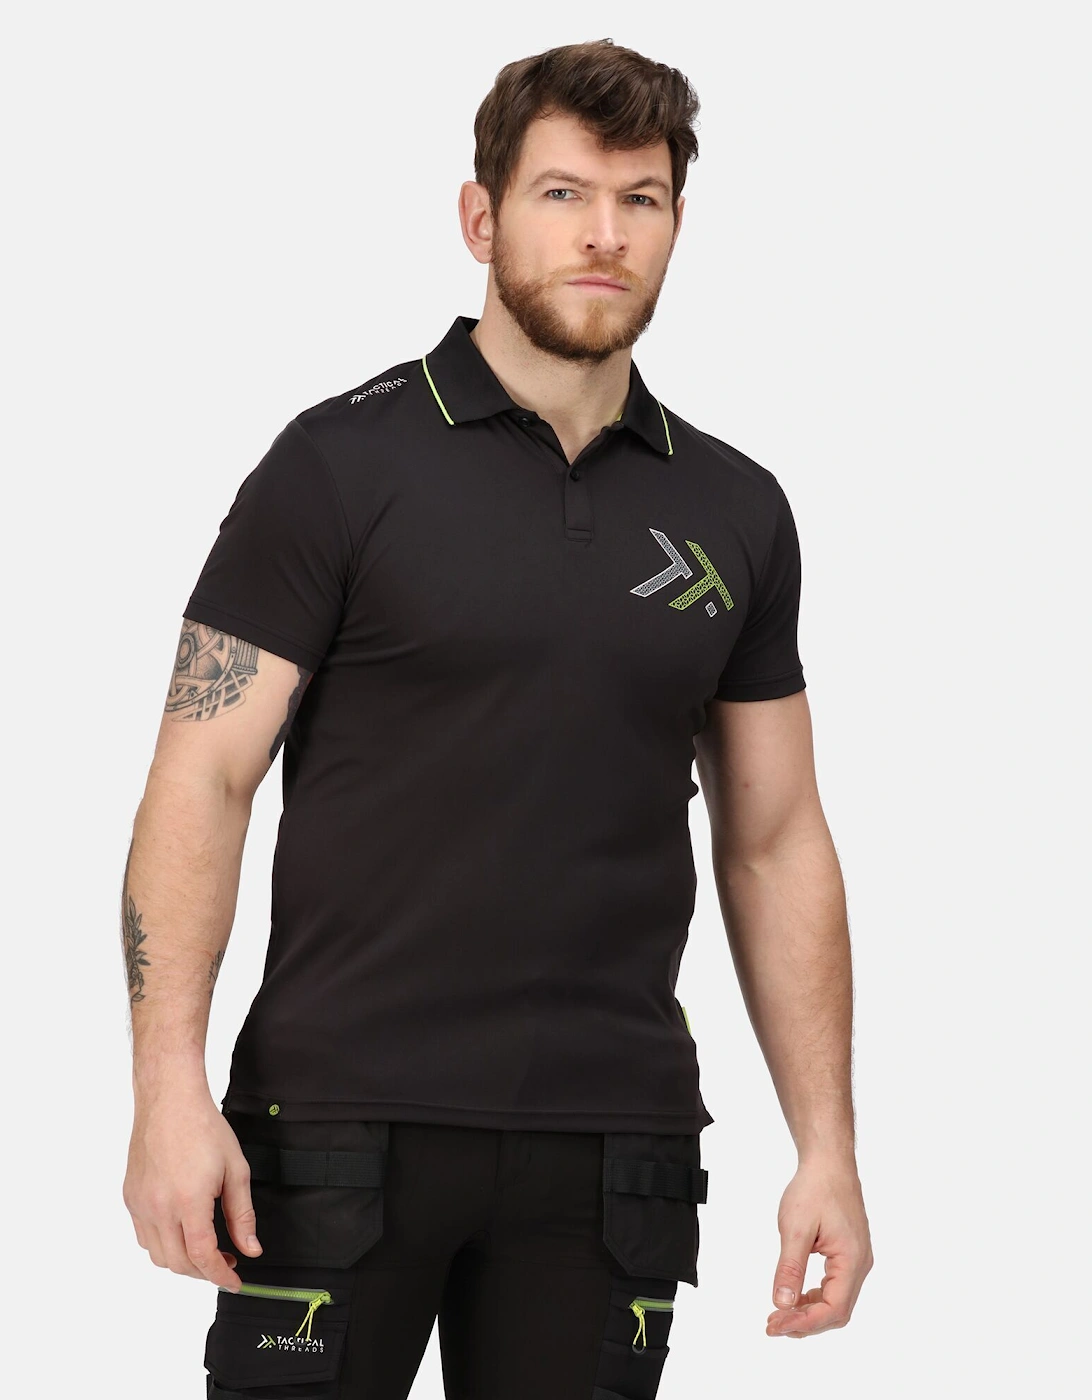 Mens Tactical Threads Polo Shirt (Pack of 2)